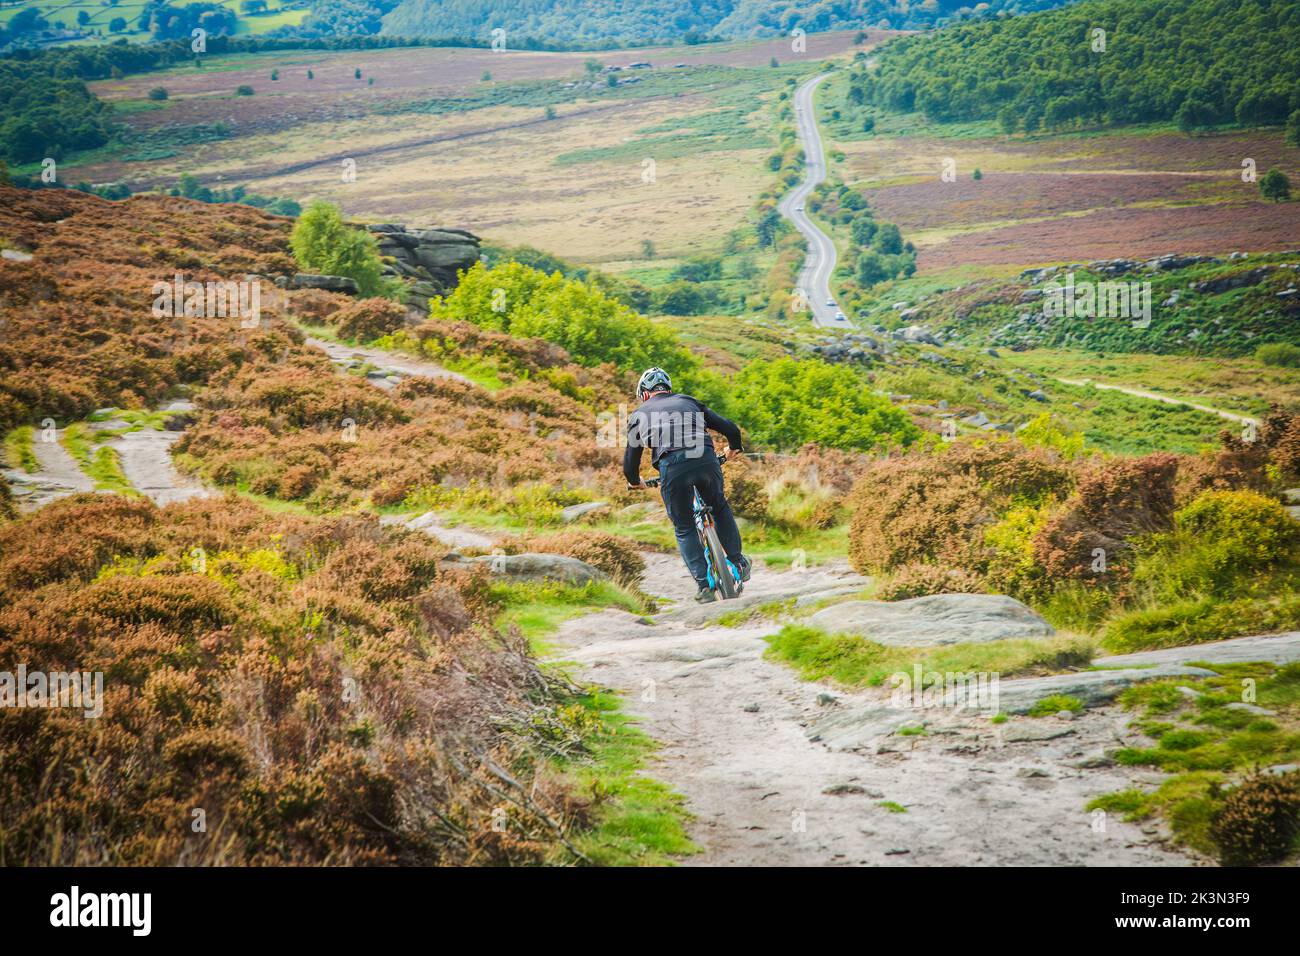 24.09.2022 Burbage, Sheffield, The Peak District is home to superb mountain biking terrain. If daring technical descents, flowing and swoopy singletra Stock Photo